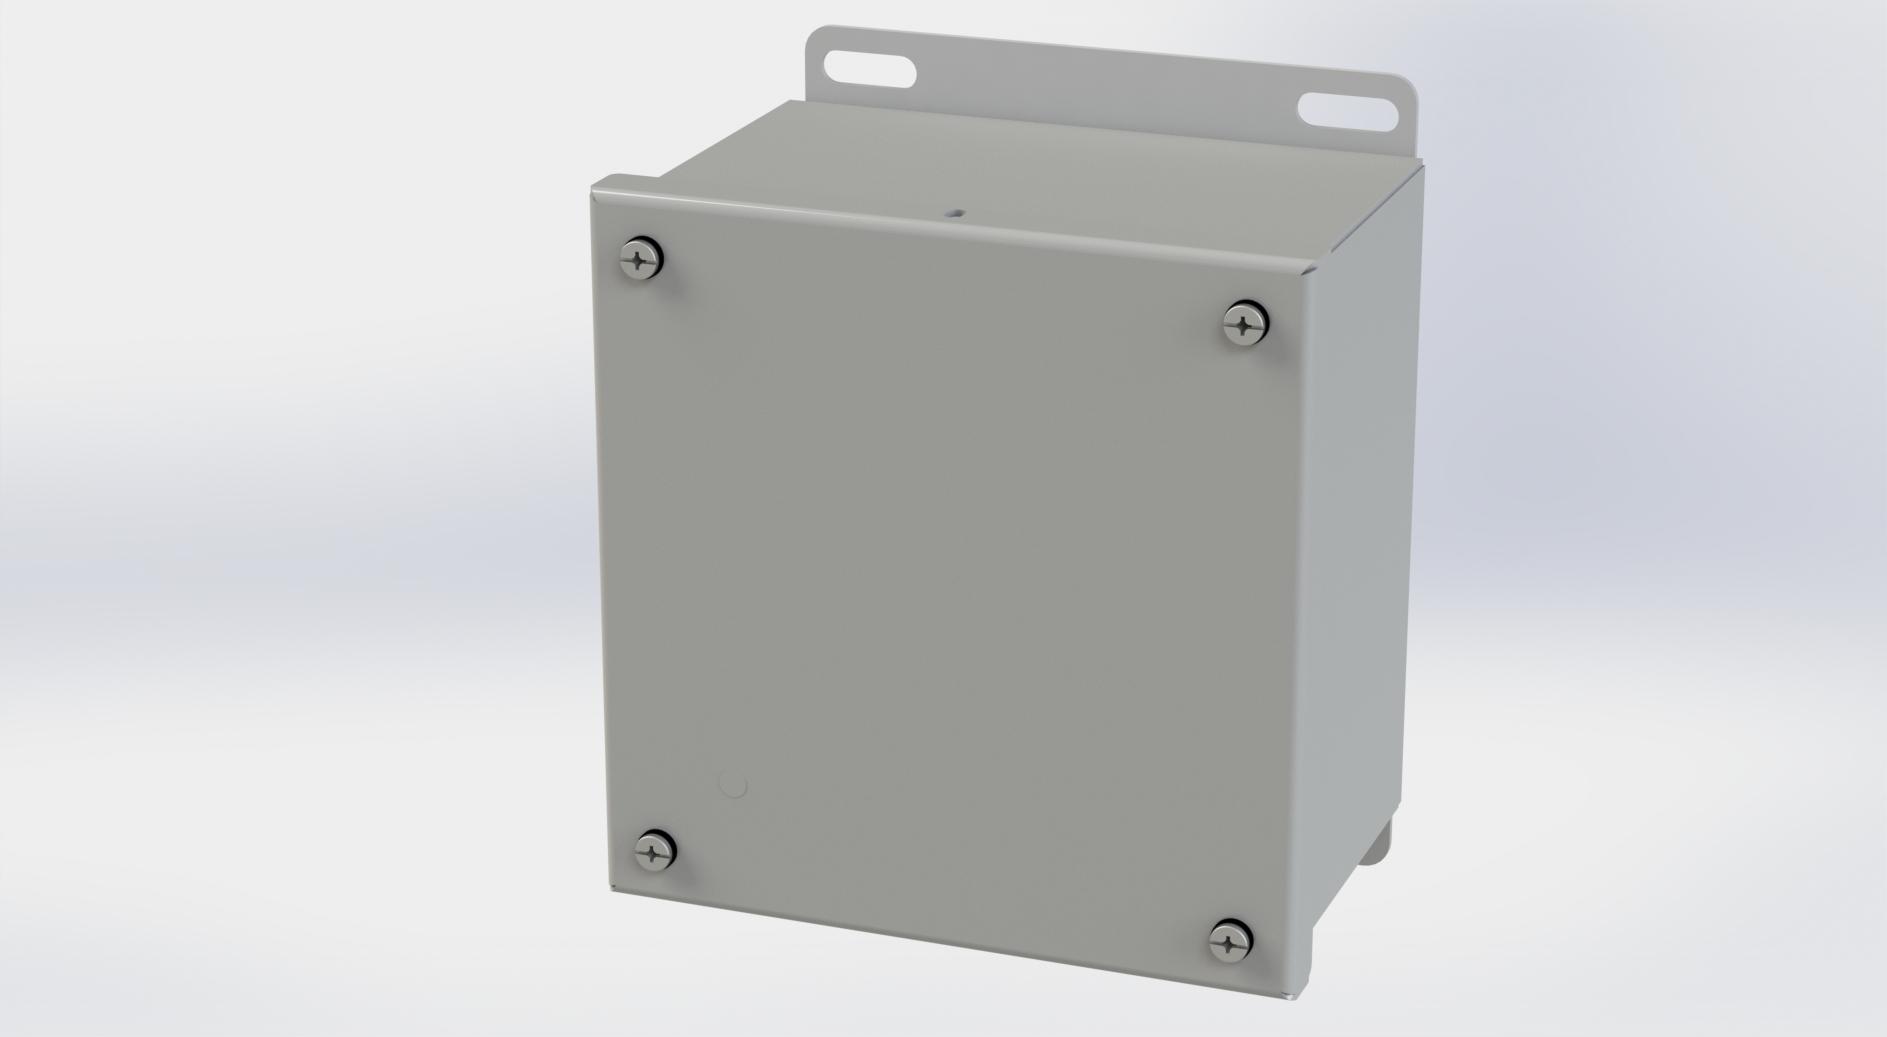 Saginaw Control SCE-606SC SC Enclosure, Height:6.13", Width:6.00", Depth:4.00", ANSI-61 gray powder coating inside and out.  Optional sub-panels are powder coated white.